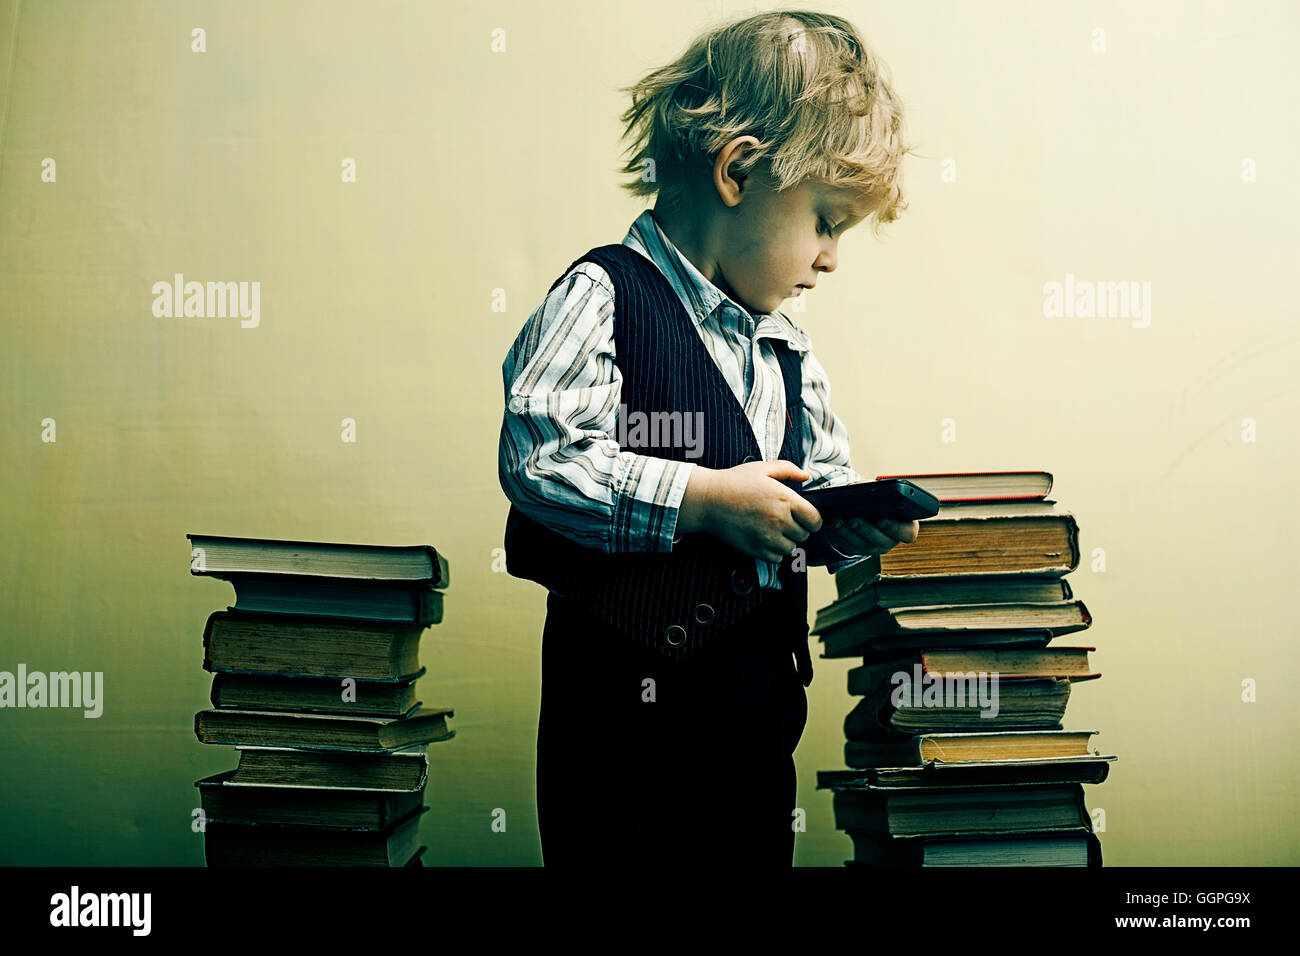 Boy holding cell phone near stacks of books Stock Photo